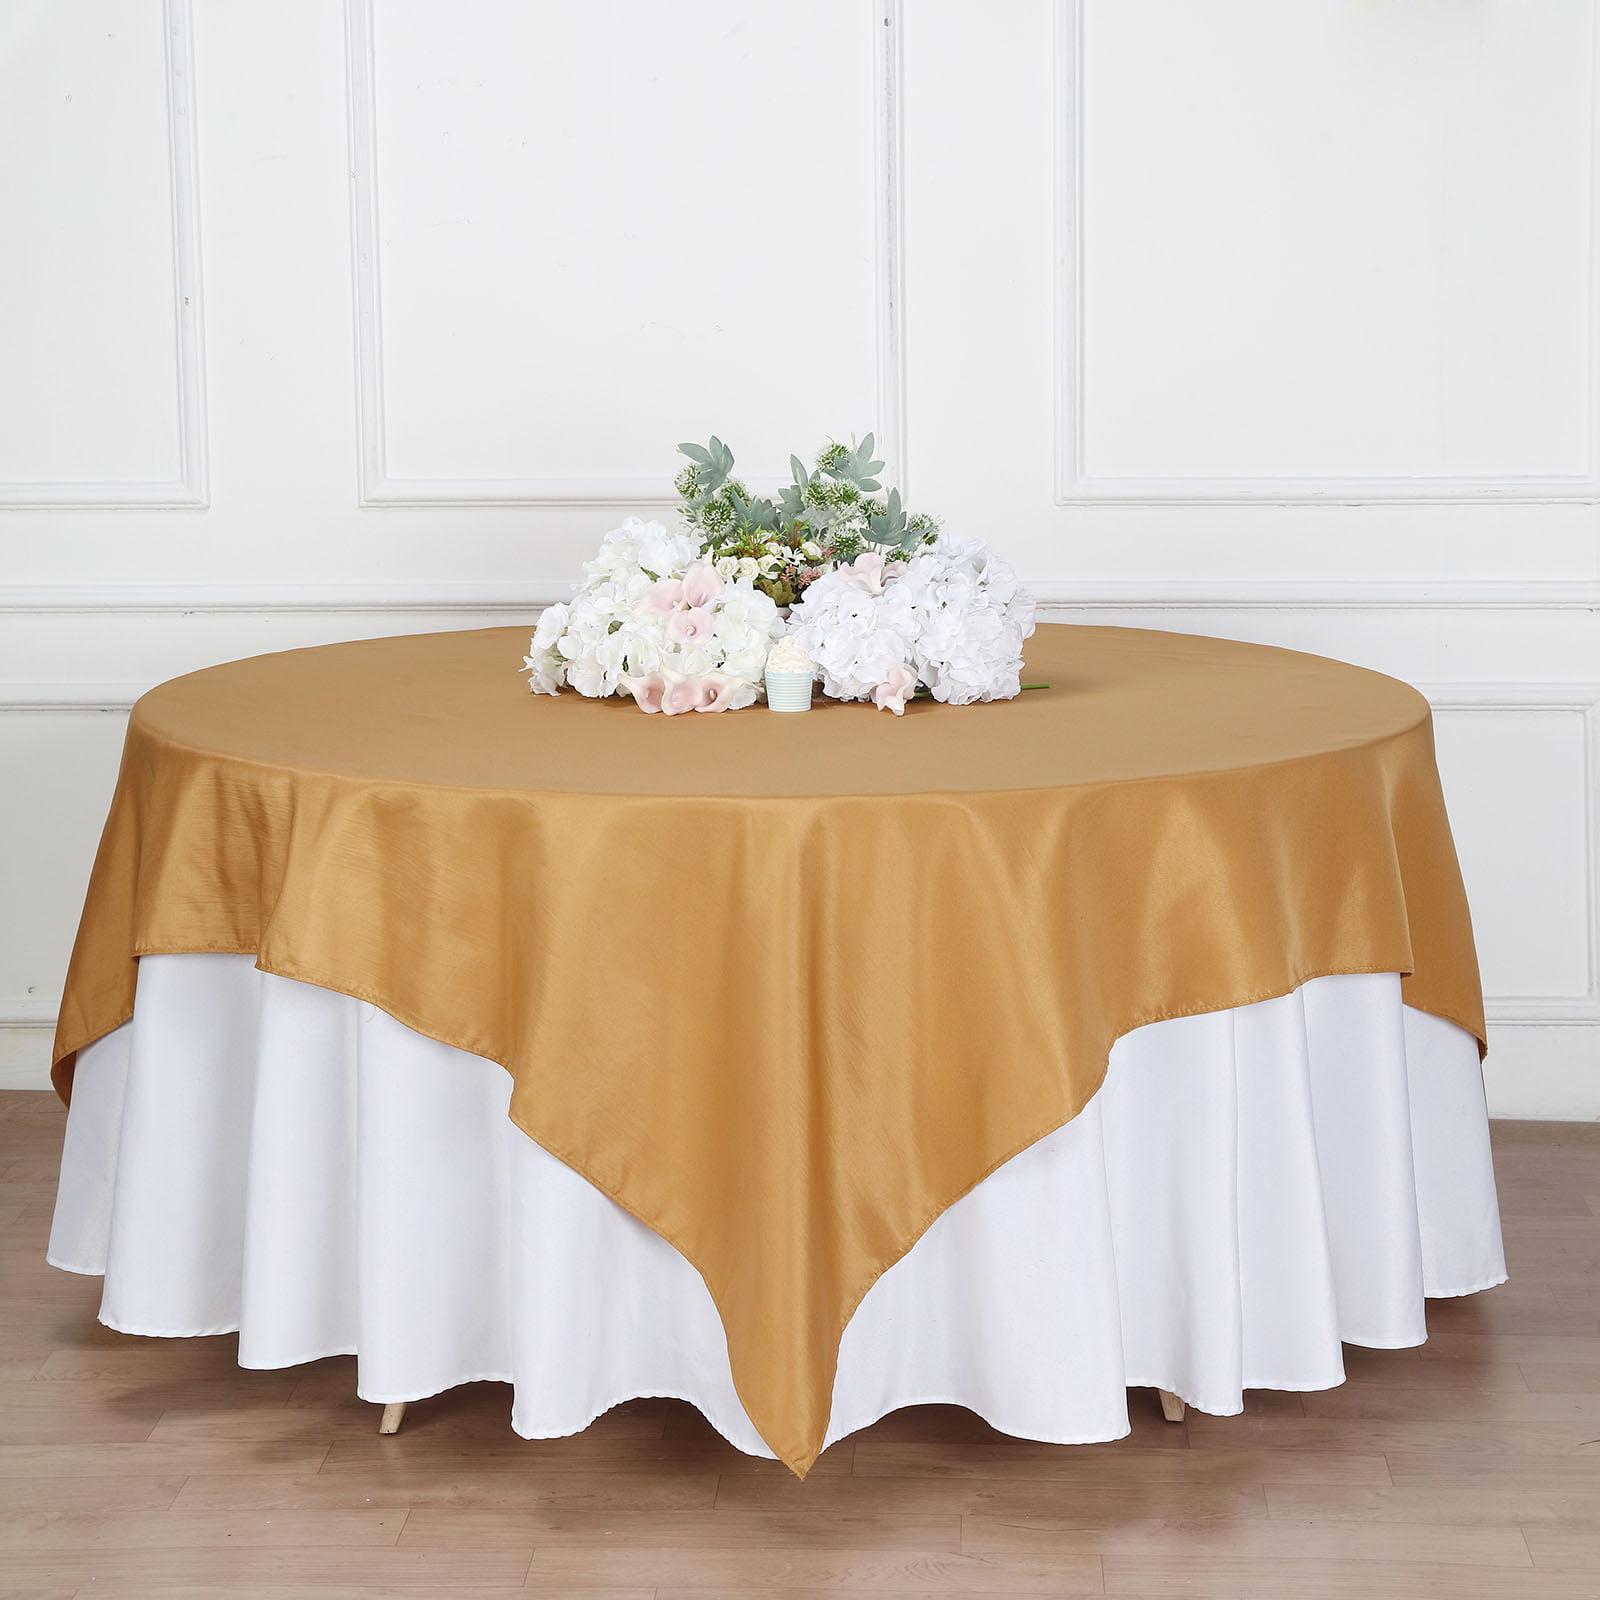 BalsaCircle 90" x 90" Square Polyester Tablecloth Table